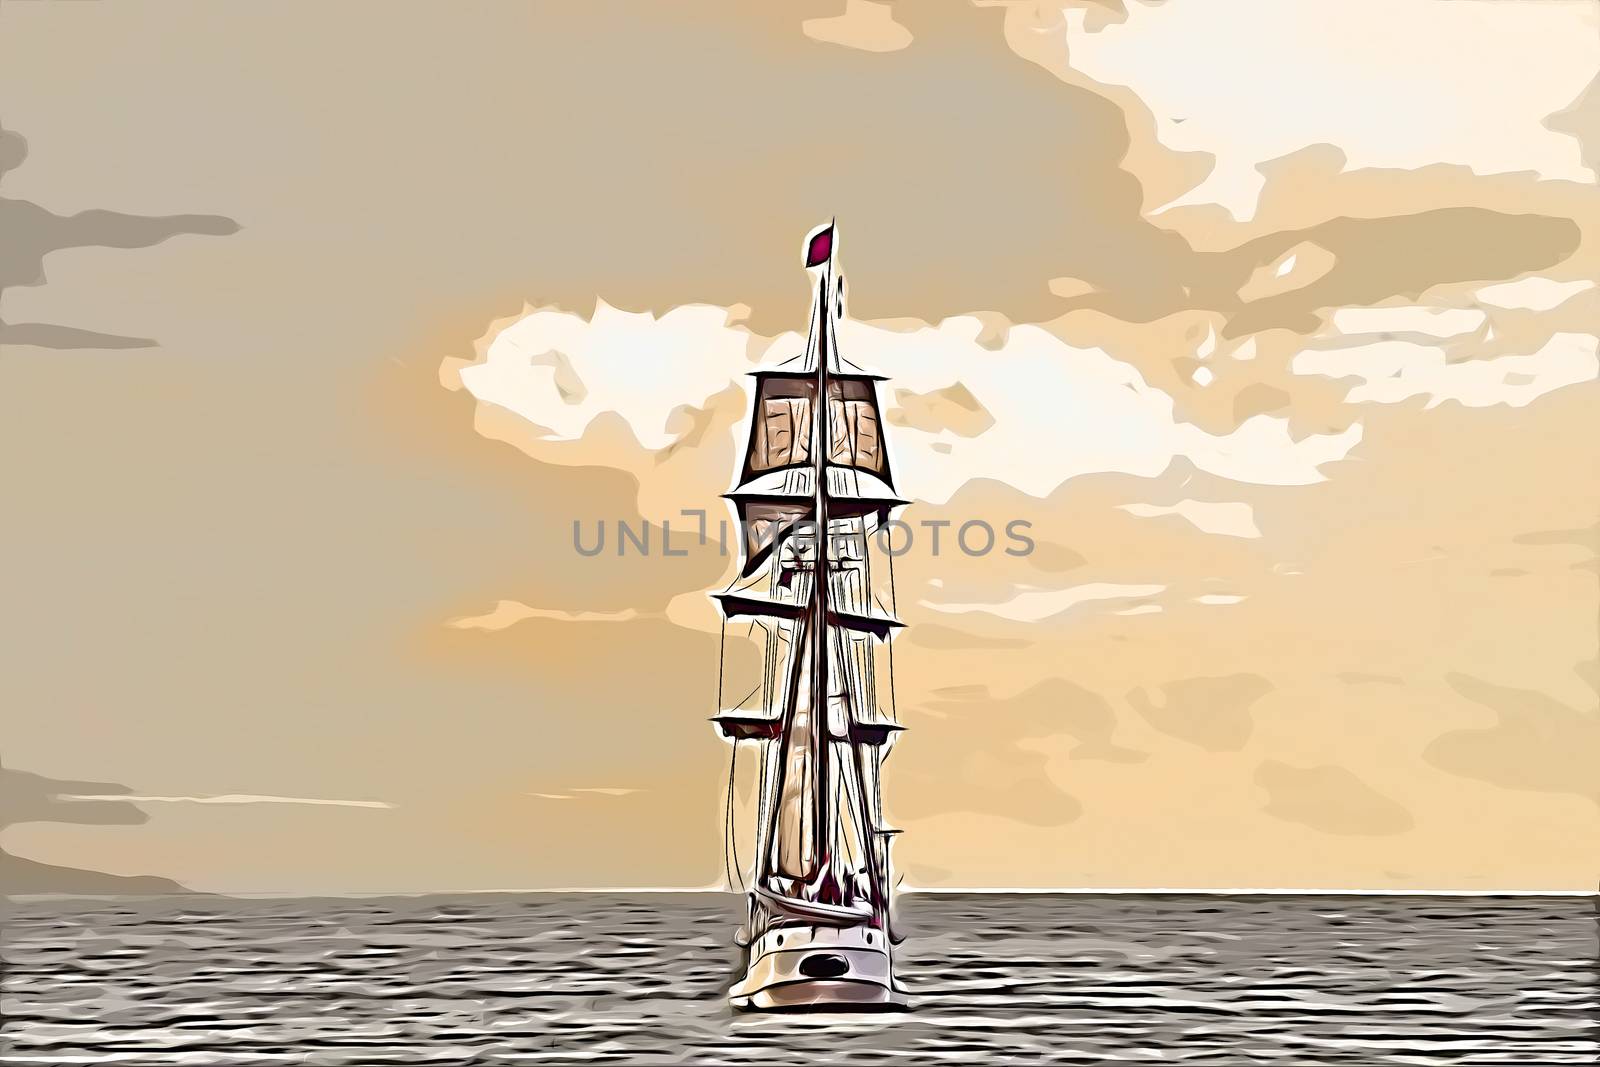 Antique tall ship, vessel leaving the harbor of The Hague, Scheveningen under a early warm sunset sky